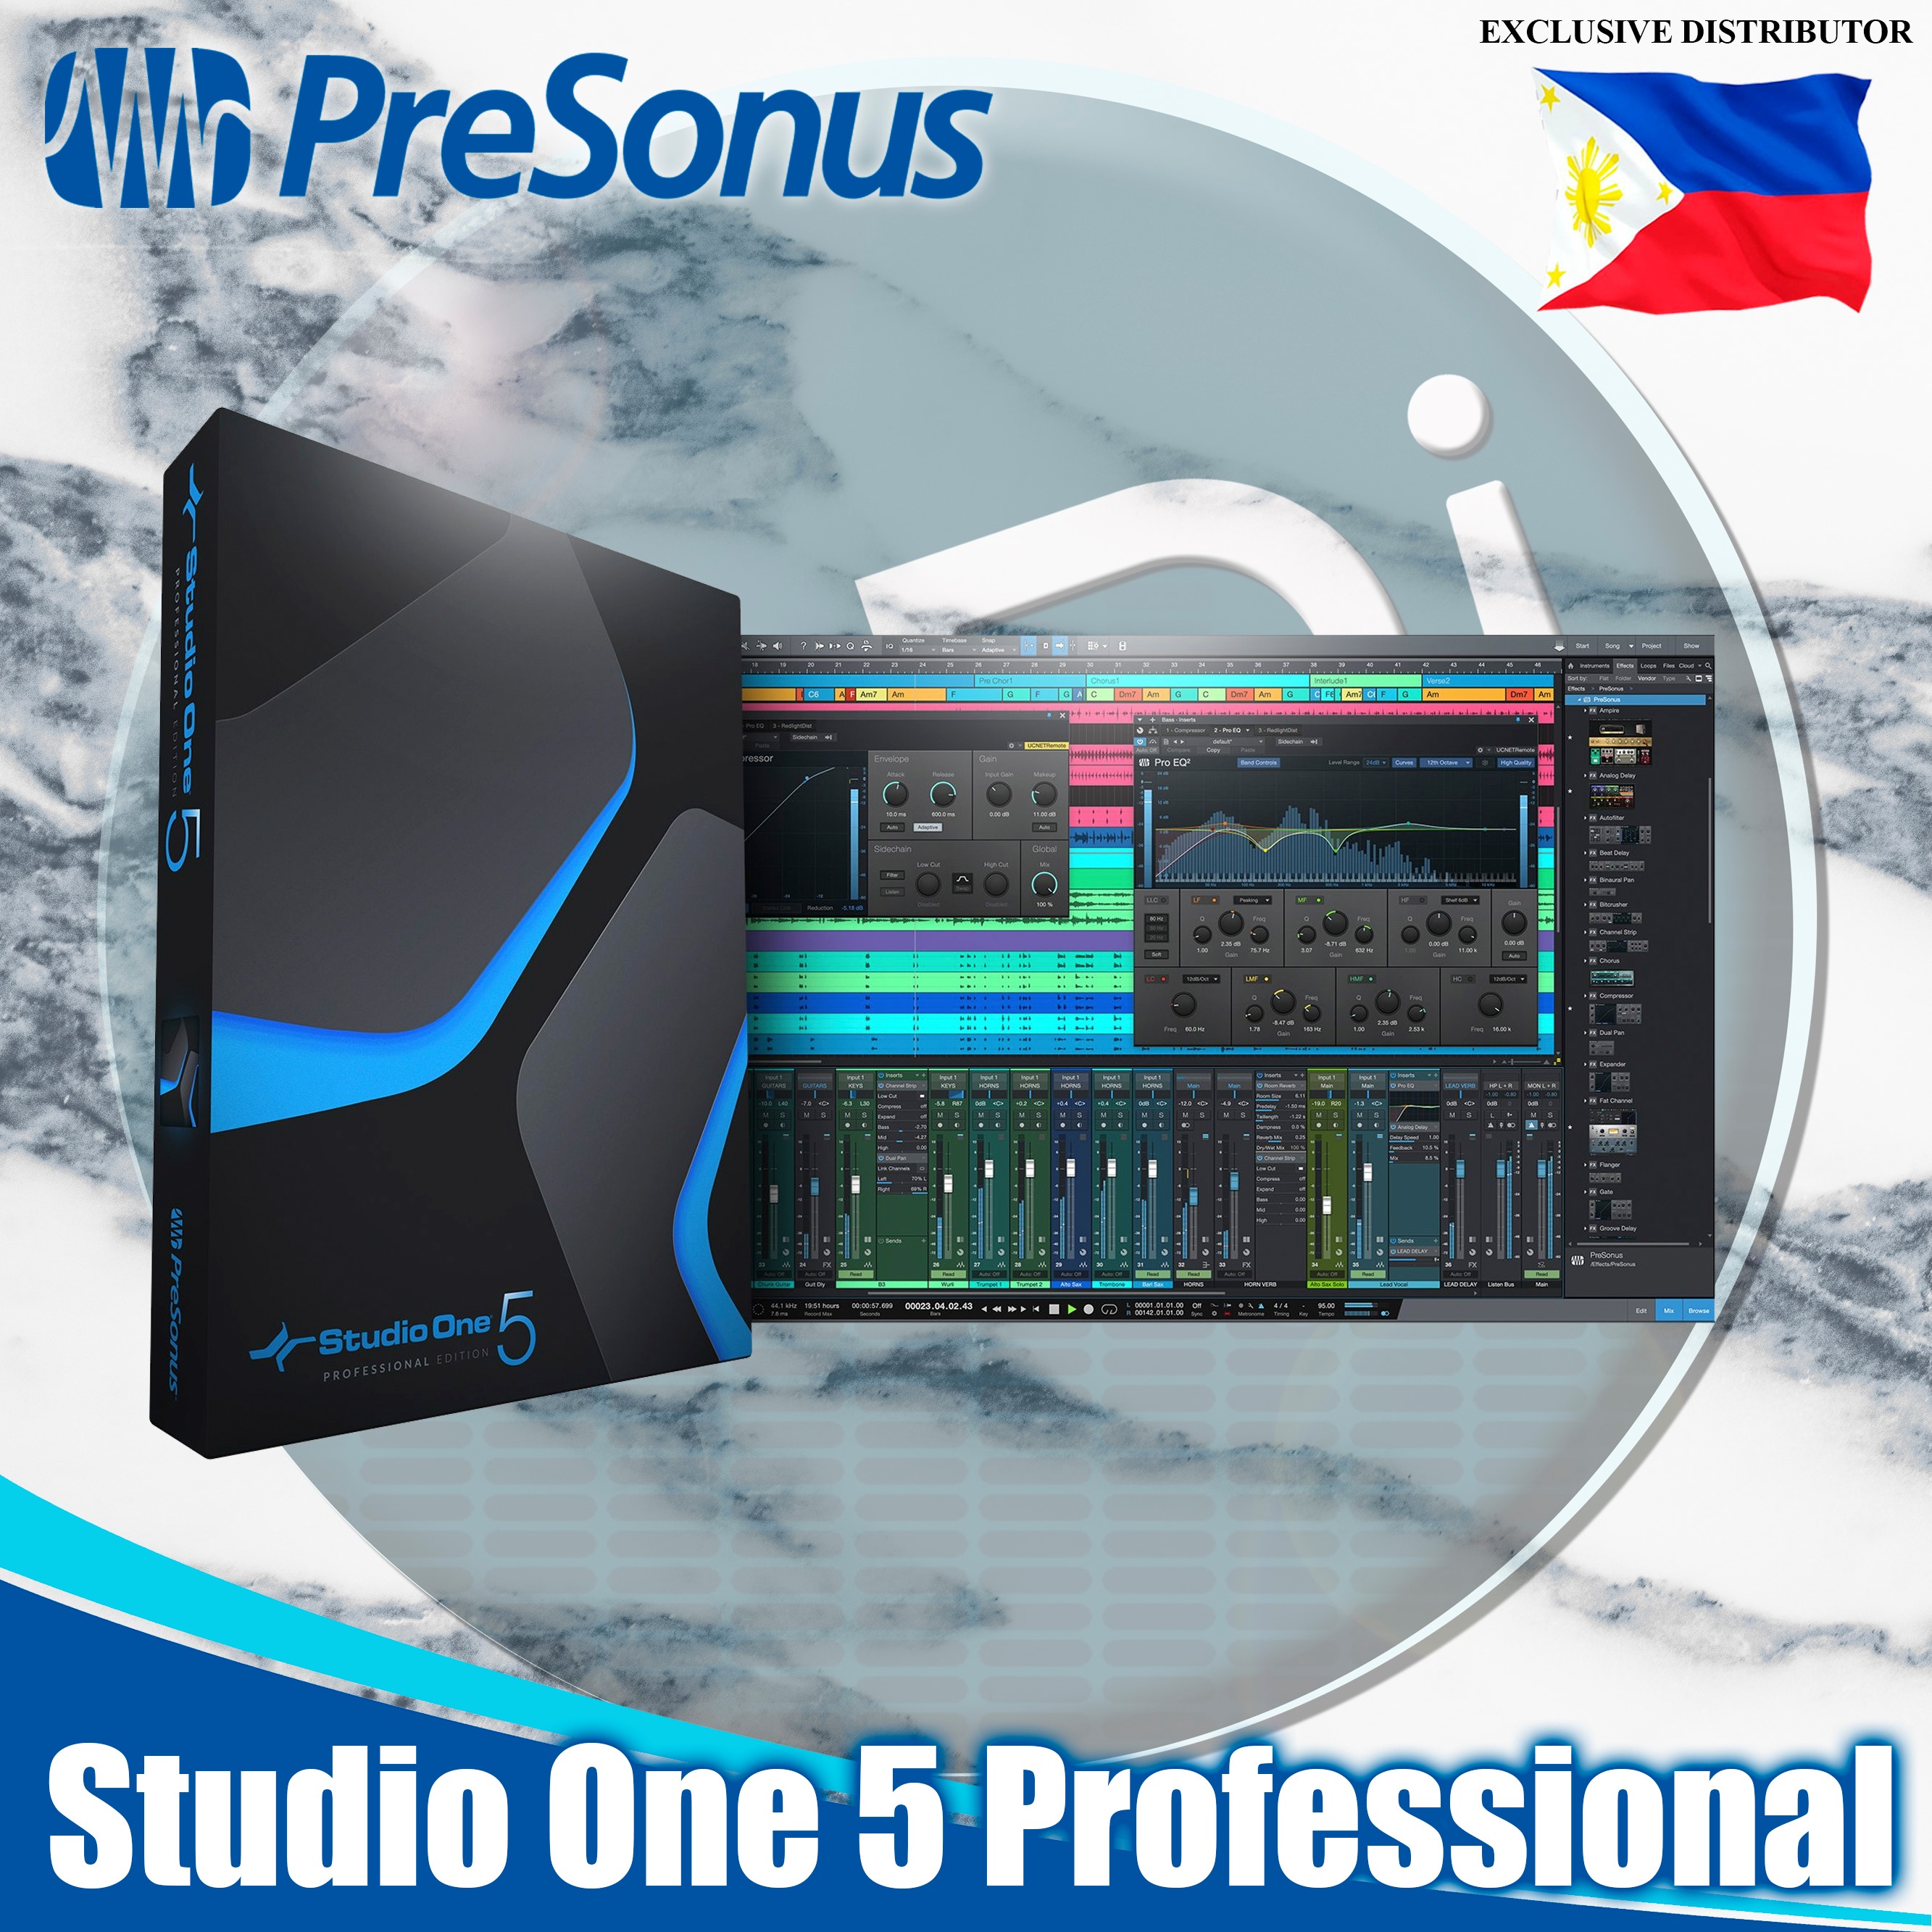 Presonus StudioOne 5 Professional DAW Software with Unlimited Tracks,  64-bit Processing, Plug-in Suite, Pitch Correction, Amp Modeling, and  Mastering Tools - Mac/PC AU, VST2, VST3 | Lazada PH